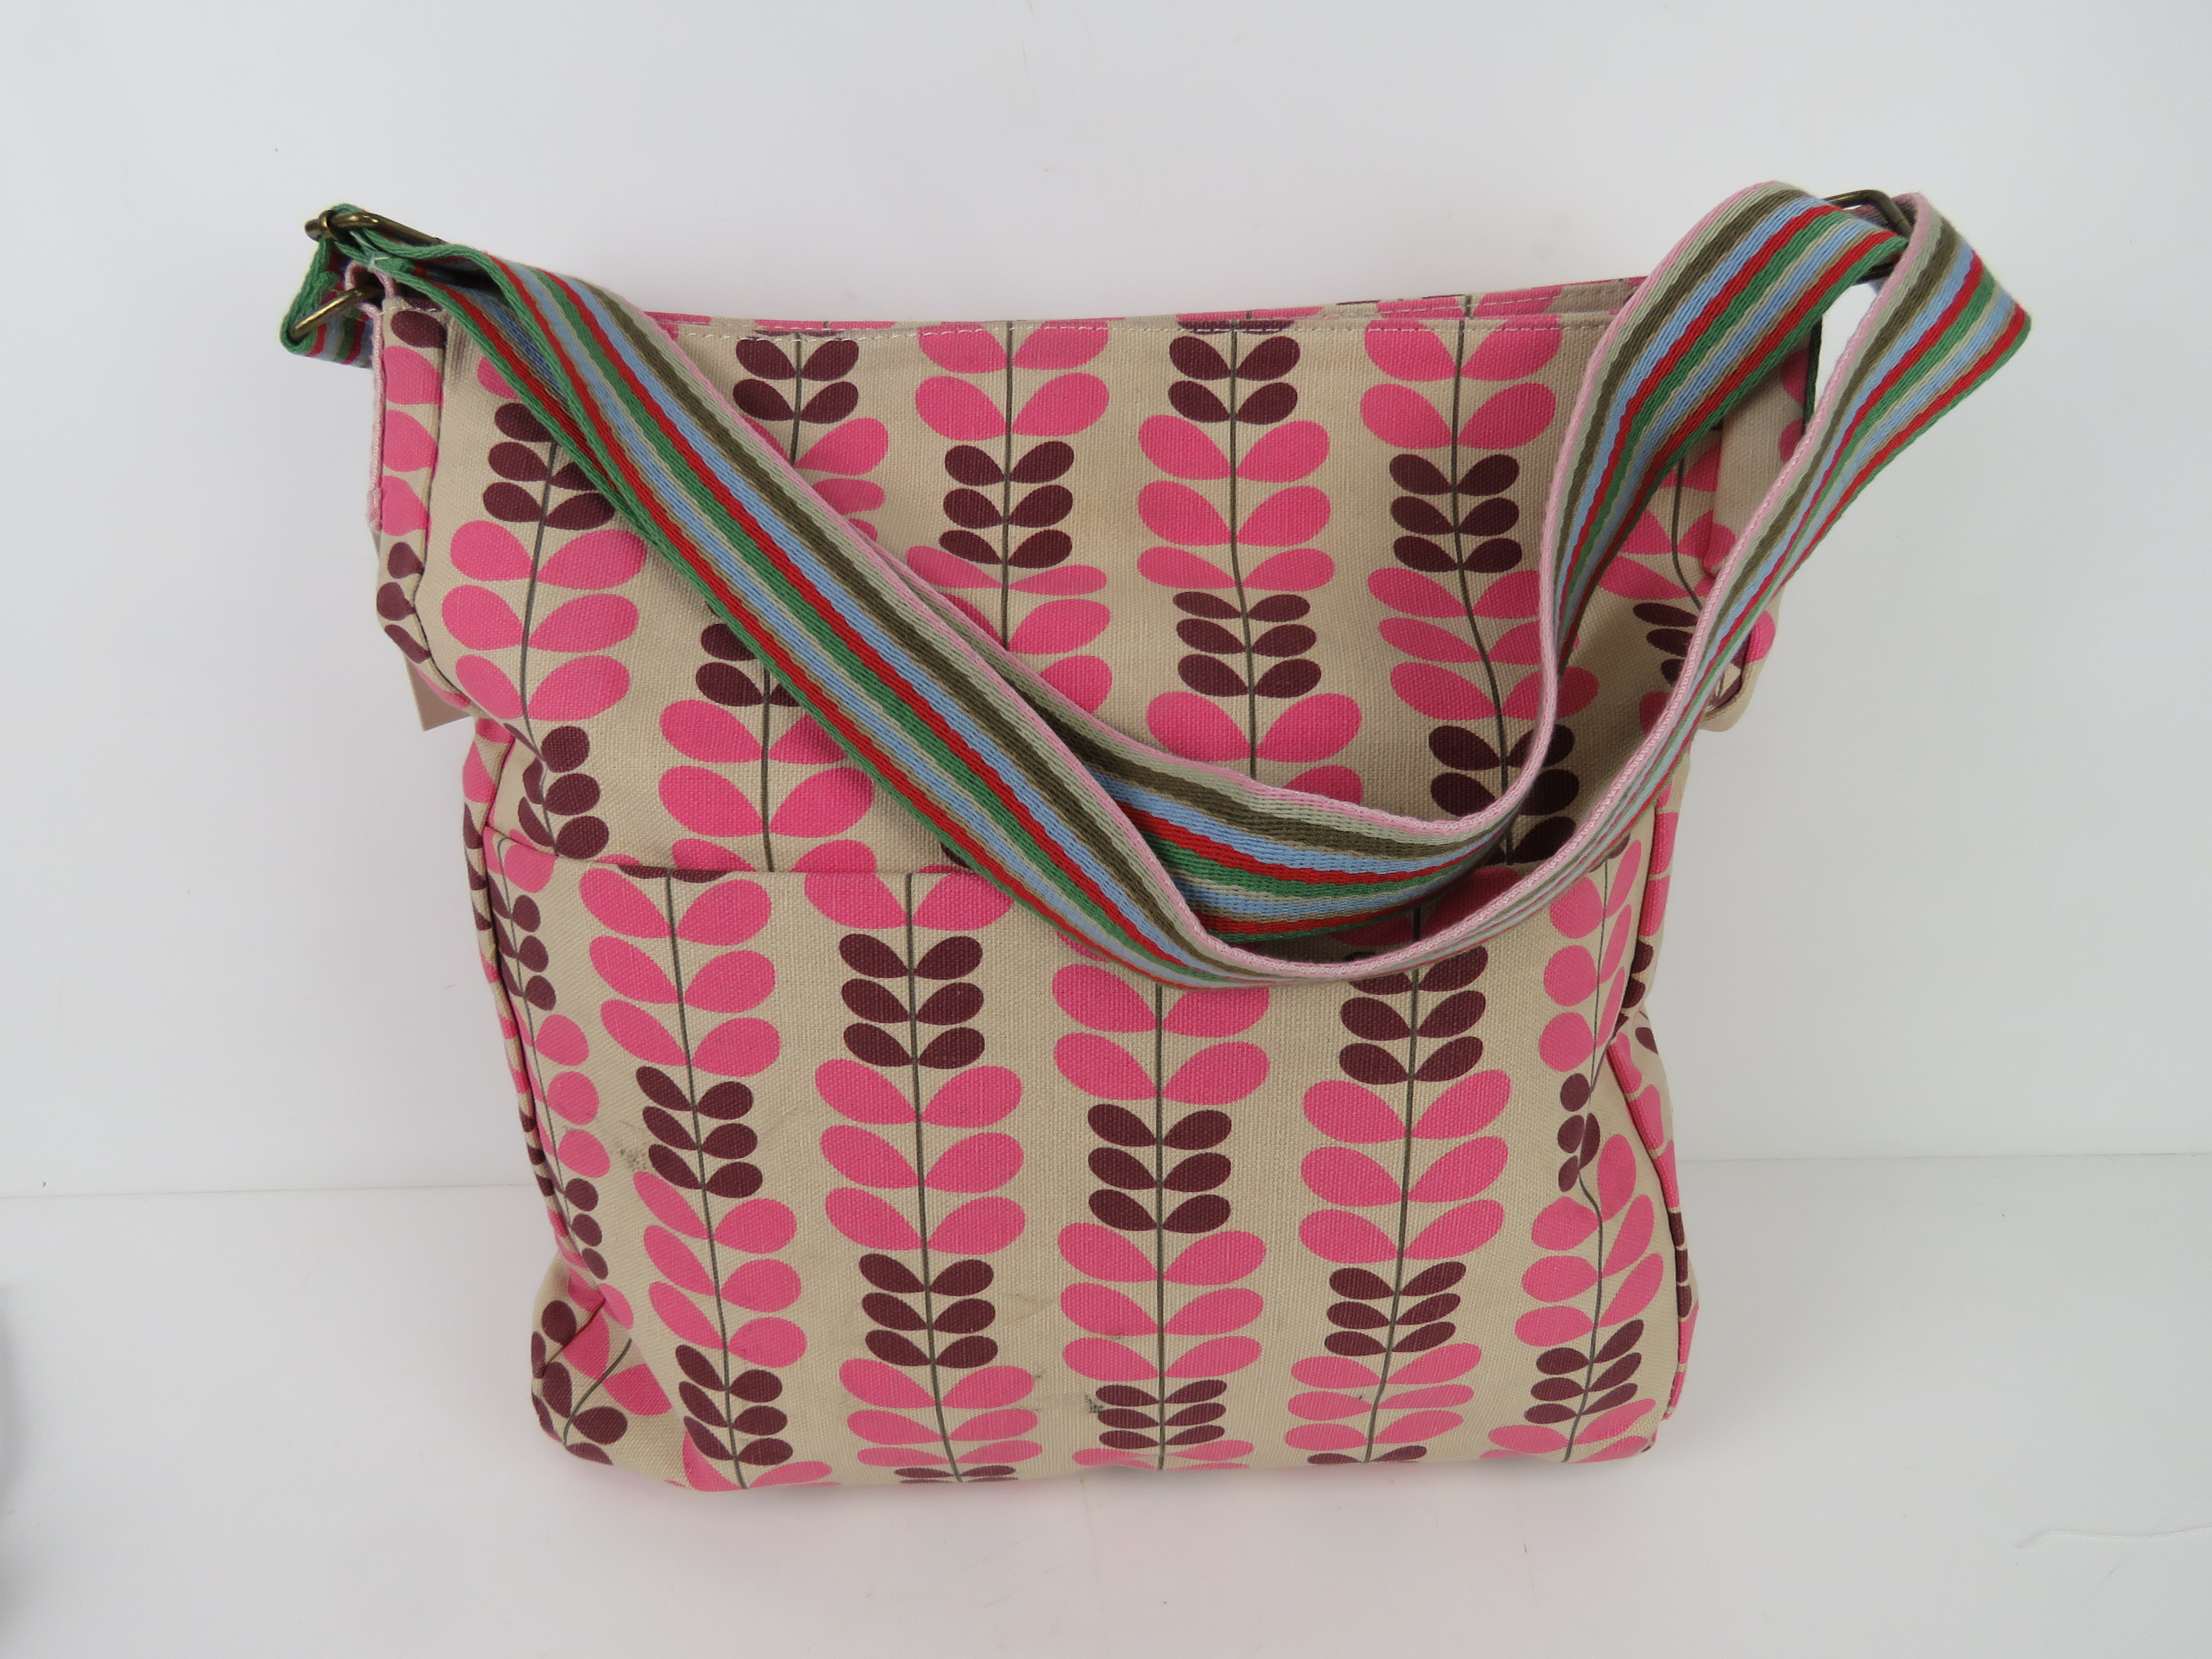 A fabric tote bag having leaf pattern in